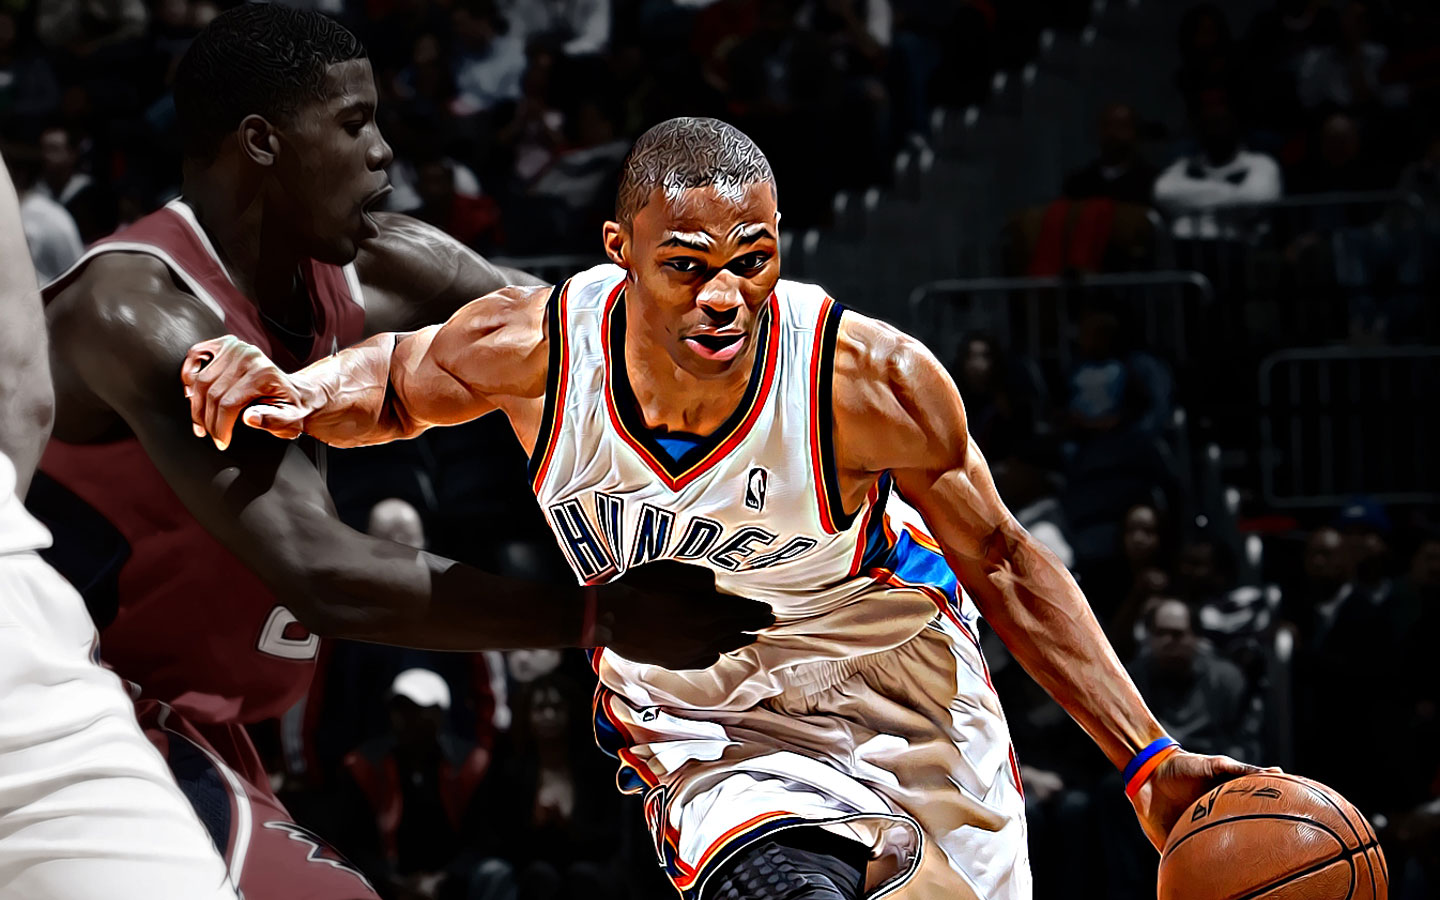 Russell Westbrook The New Kobe Bryant And Michael Jordan Says D